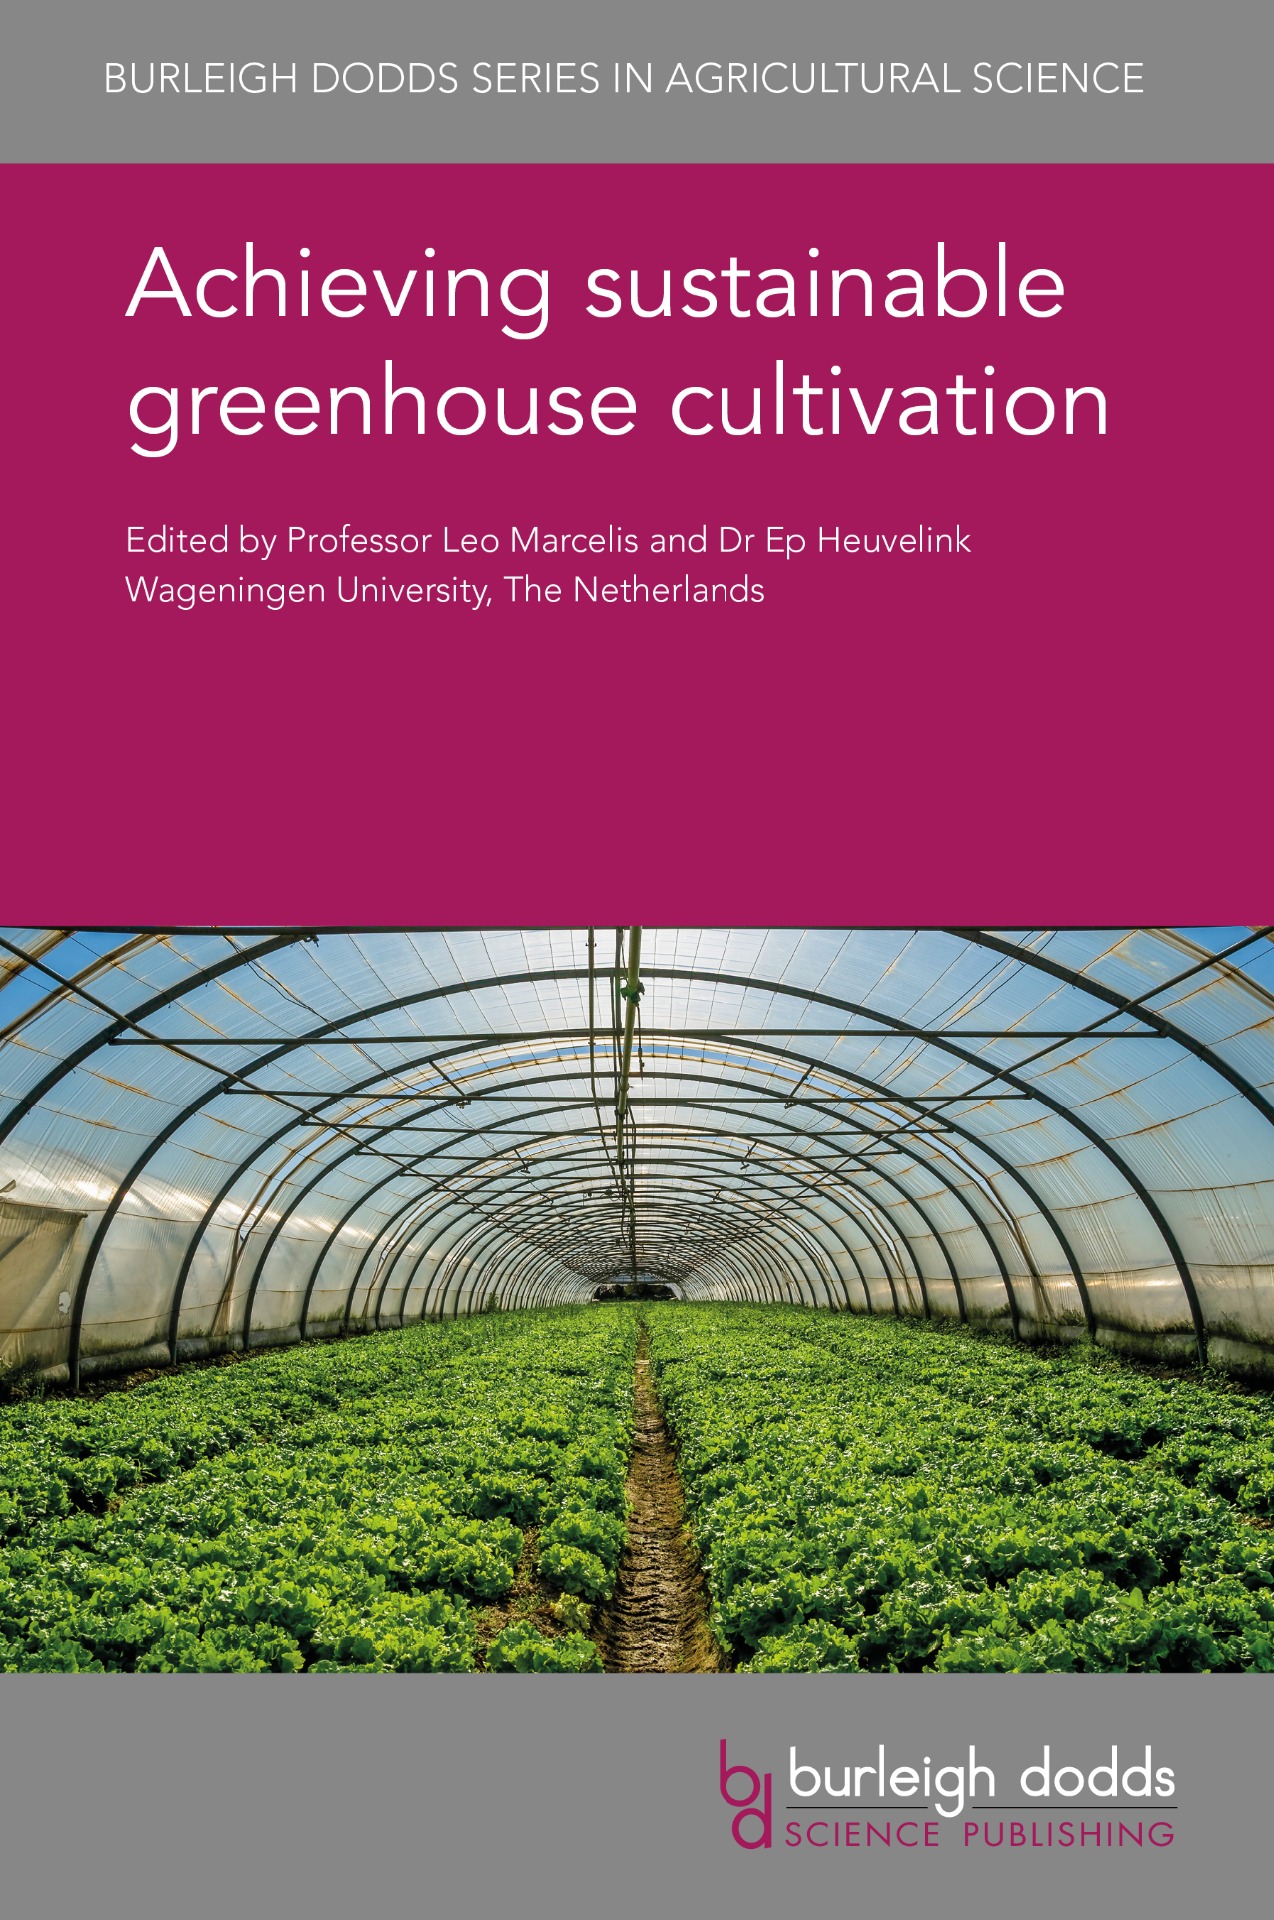 Achieving sustainable greenhouse cultivation